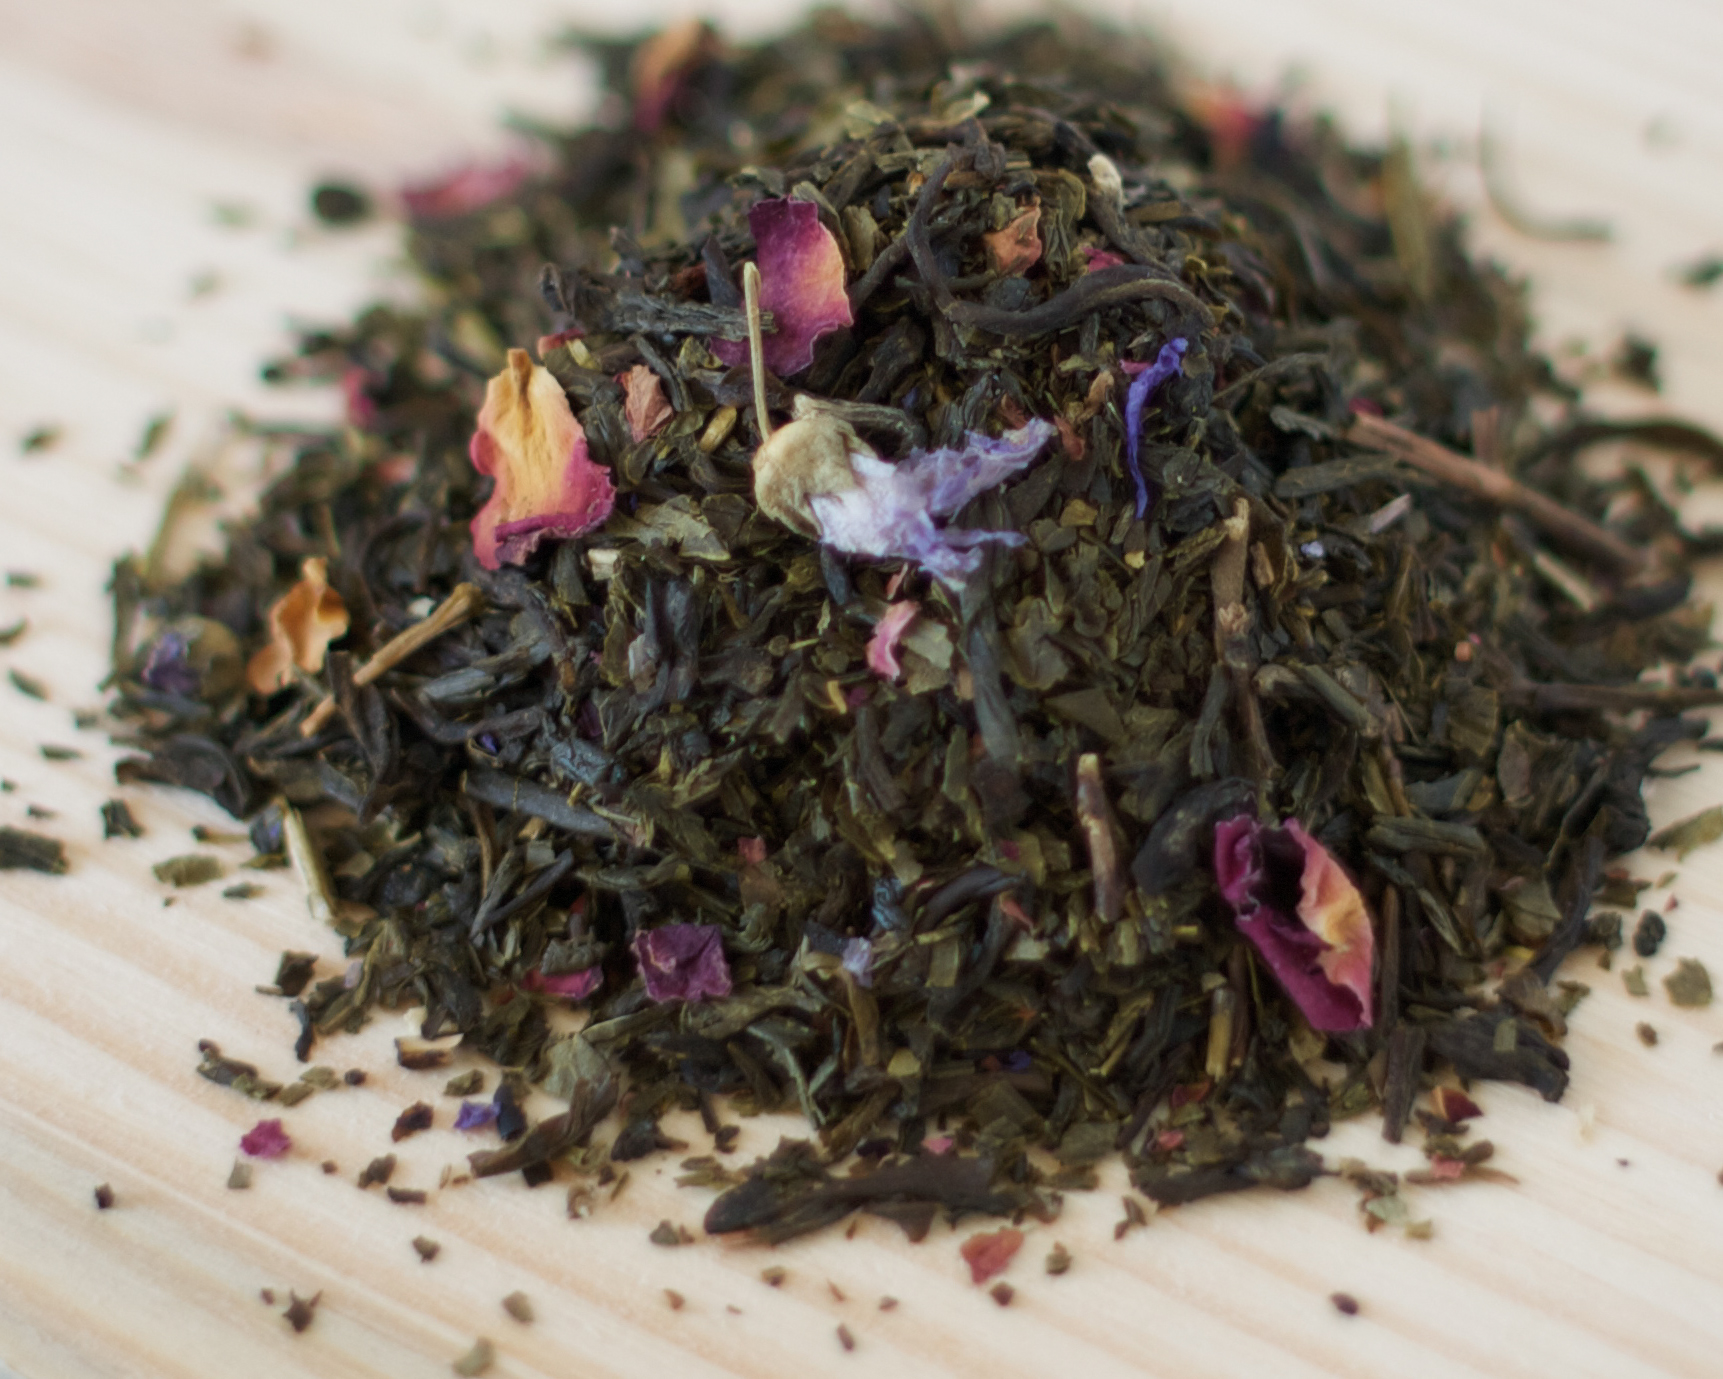 DEAN & DELUCA Thailand - Happy Father's Day. Mariage Freres' King's Tea  expresses a true love and respect. Boasting blue tea from Thailand, the  blend is scented with delicate spices and bergamot. #